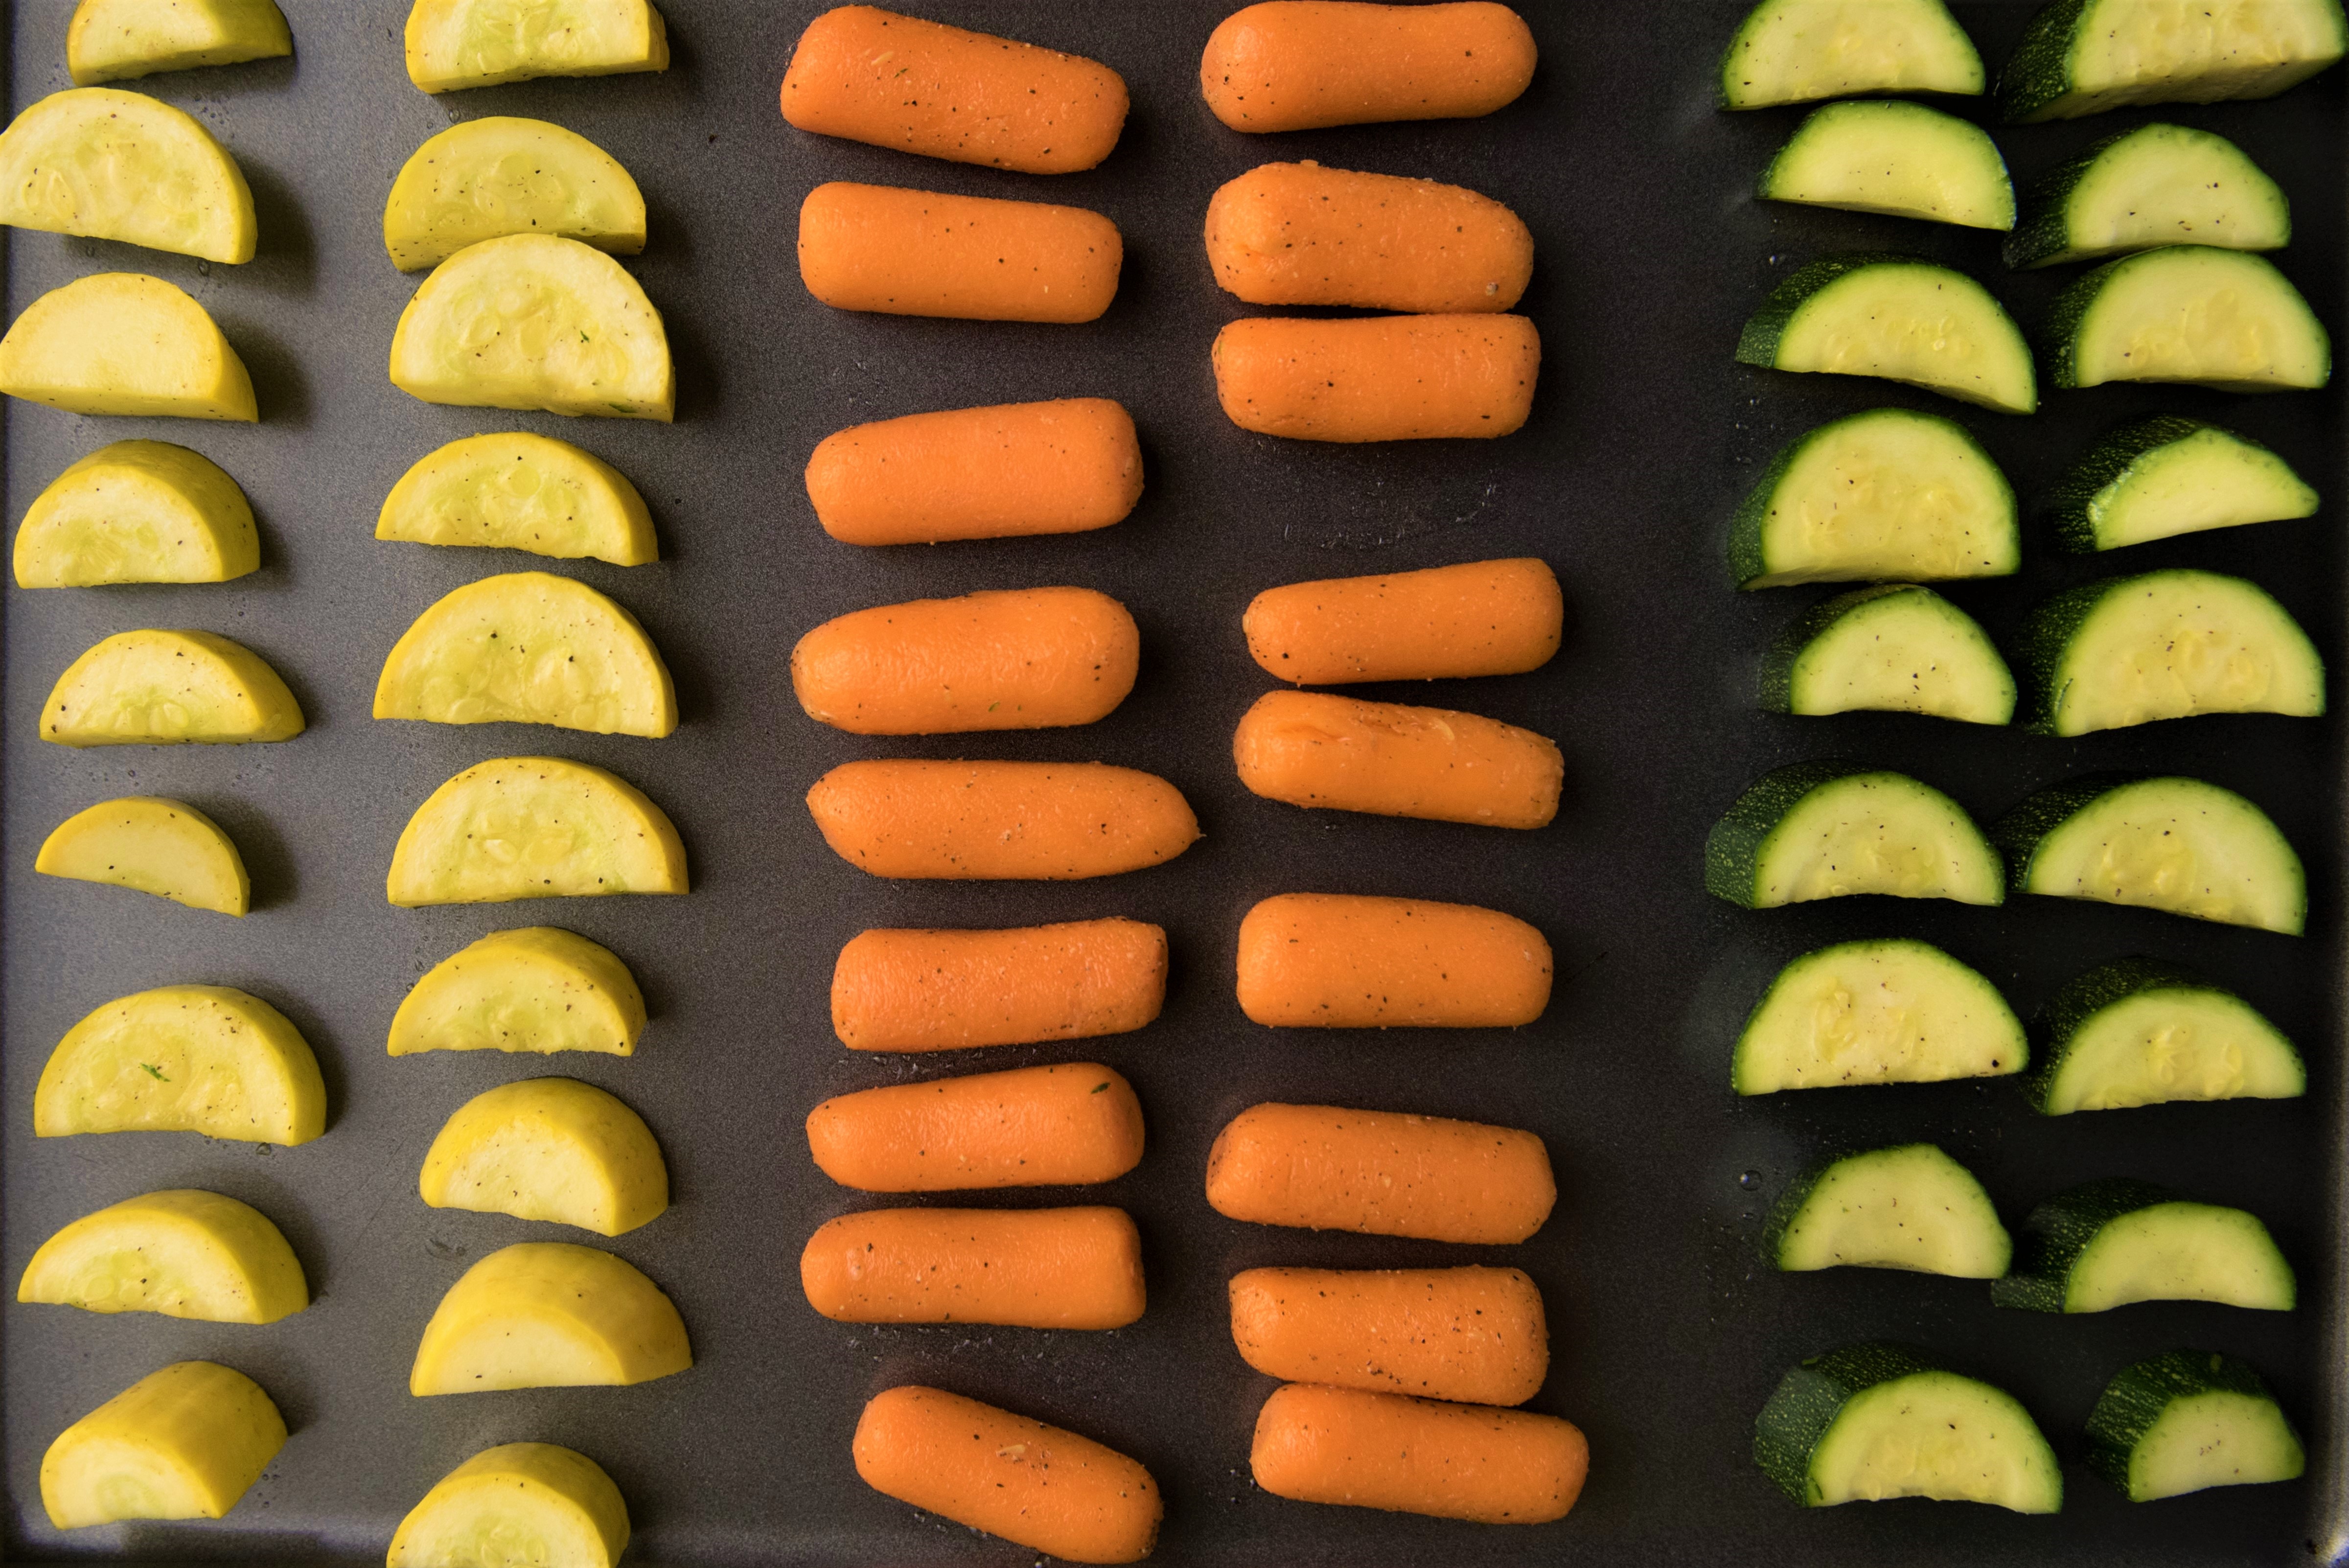 Yellow squash, carrots, and zucchini on baking sheet to be roasted.